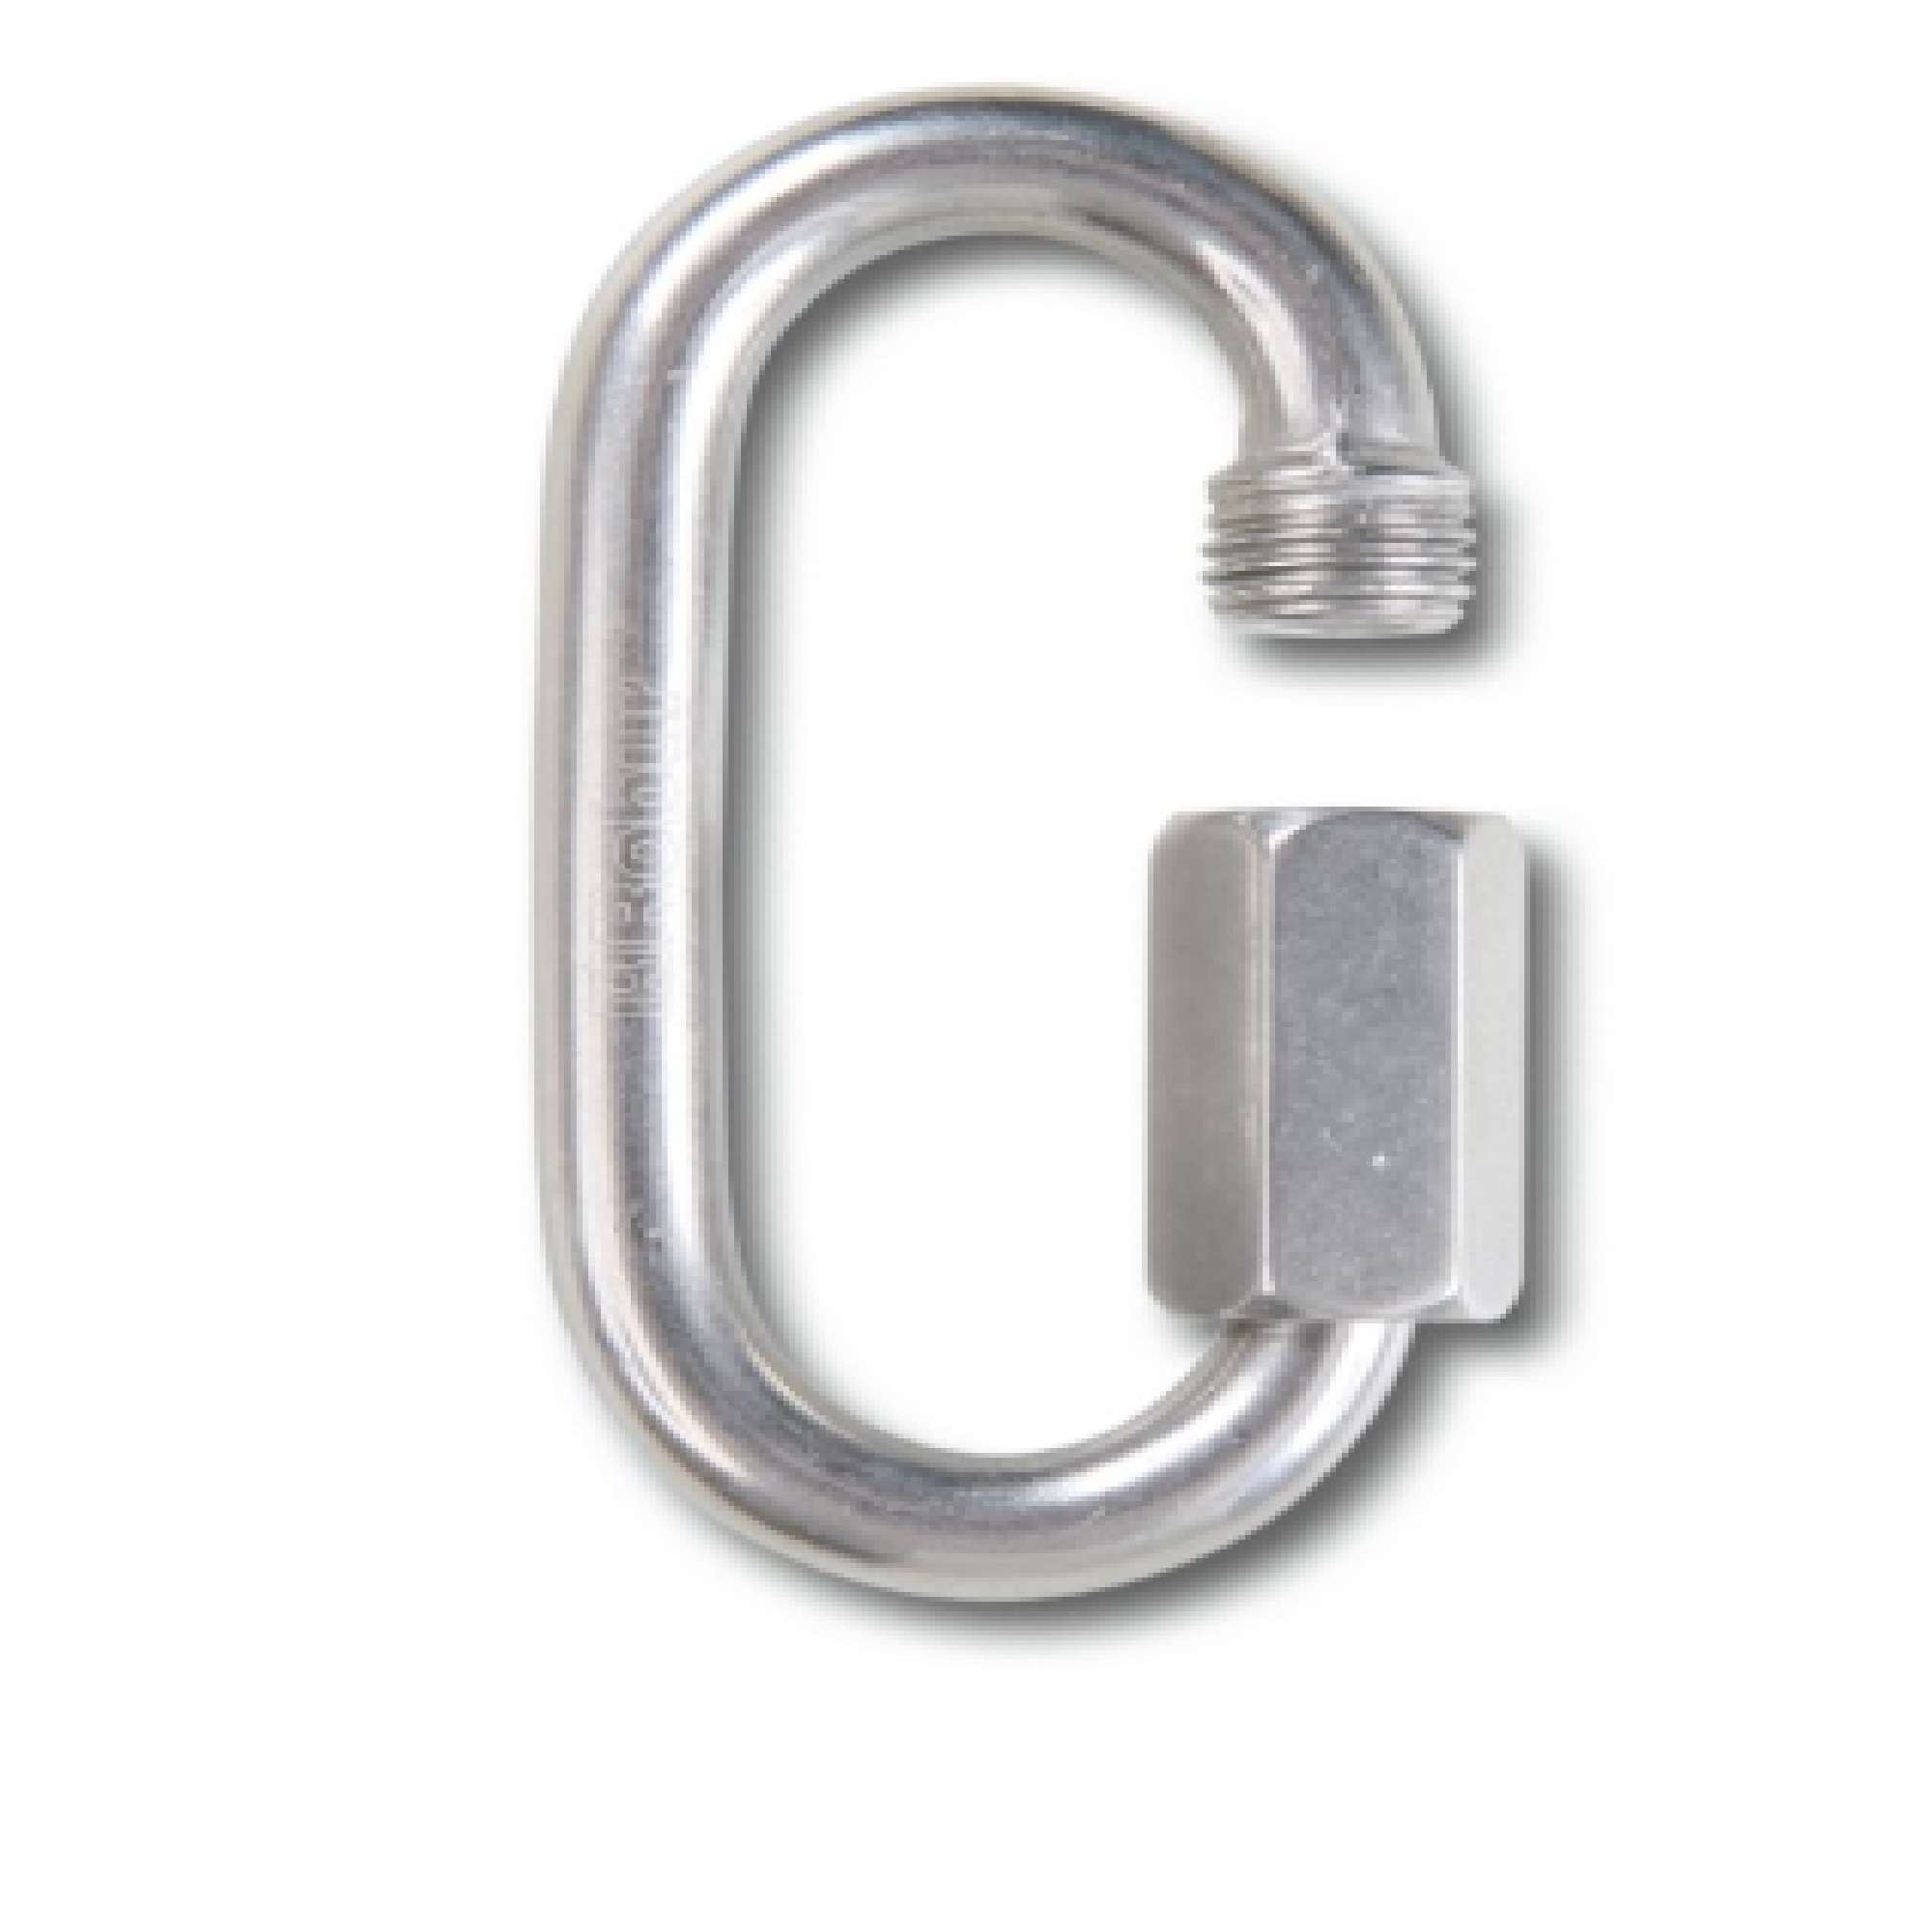 AISI 316 stainless steel connecting links - Beta 82800204